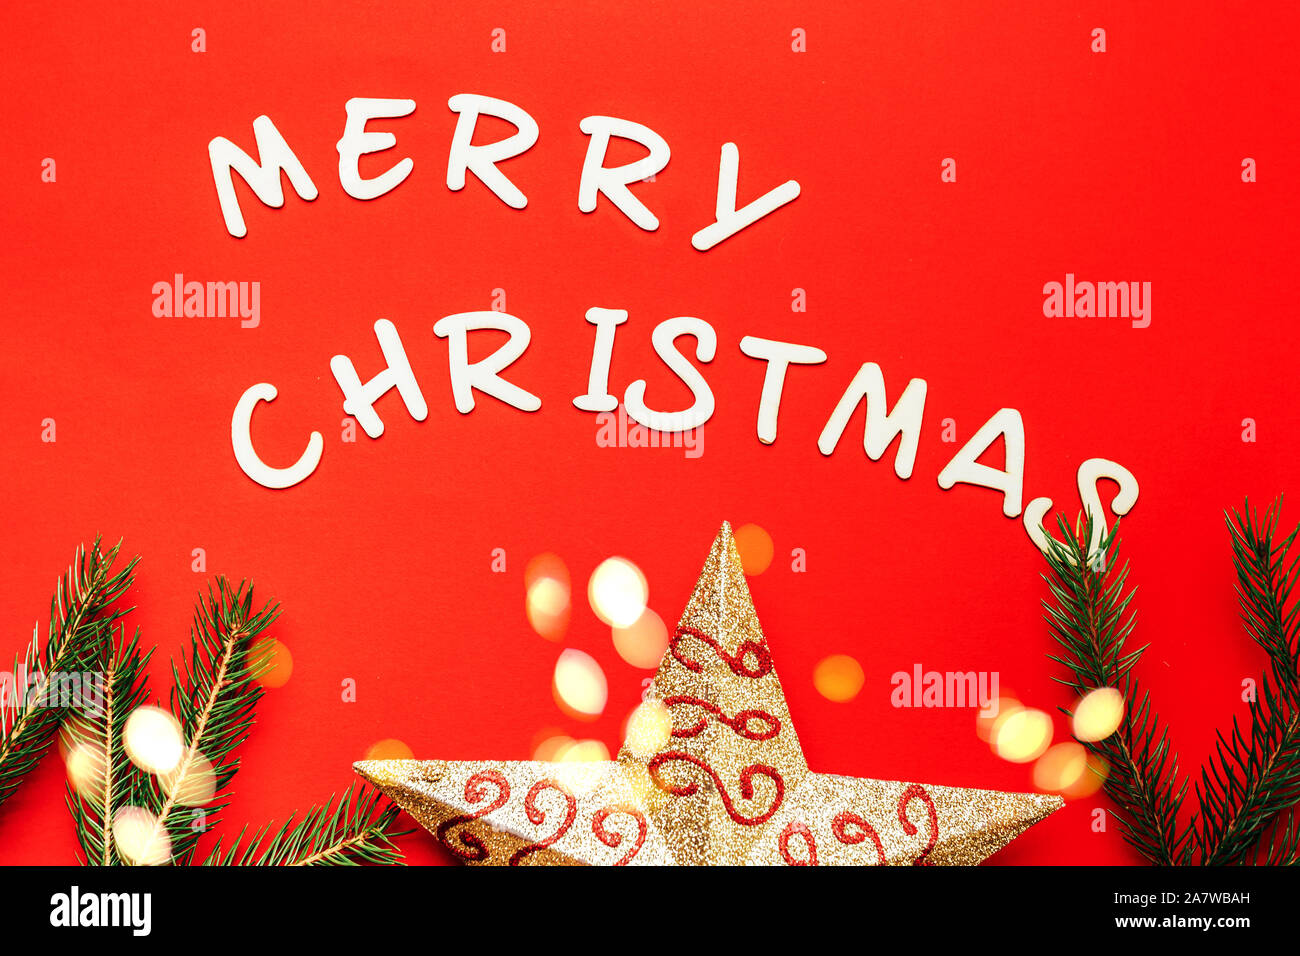 words of Merry christmas on red background. Stock Photo